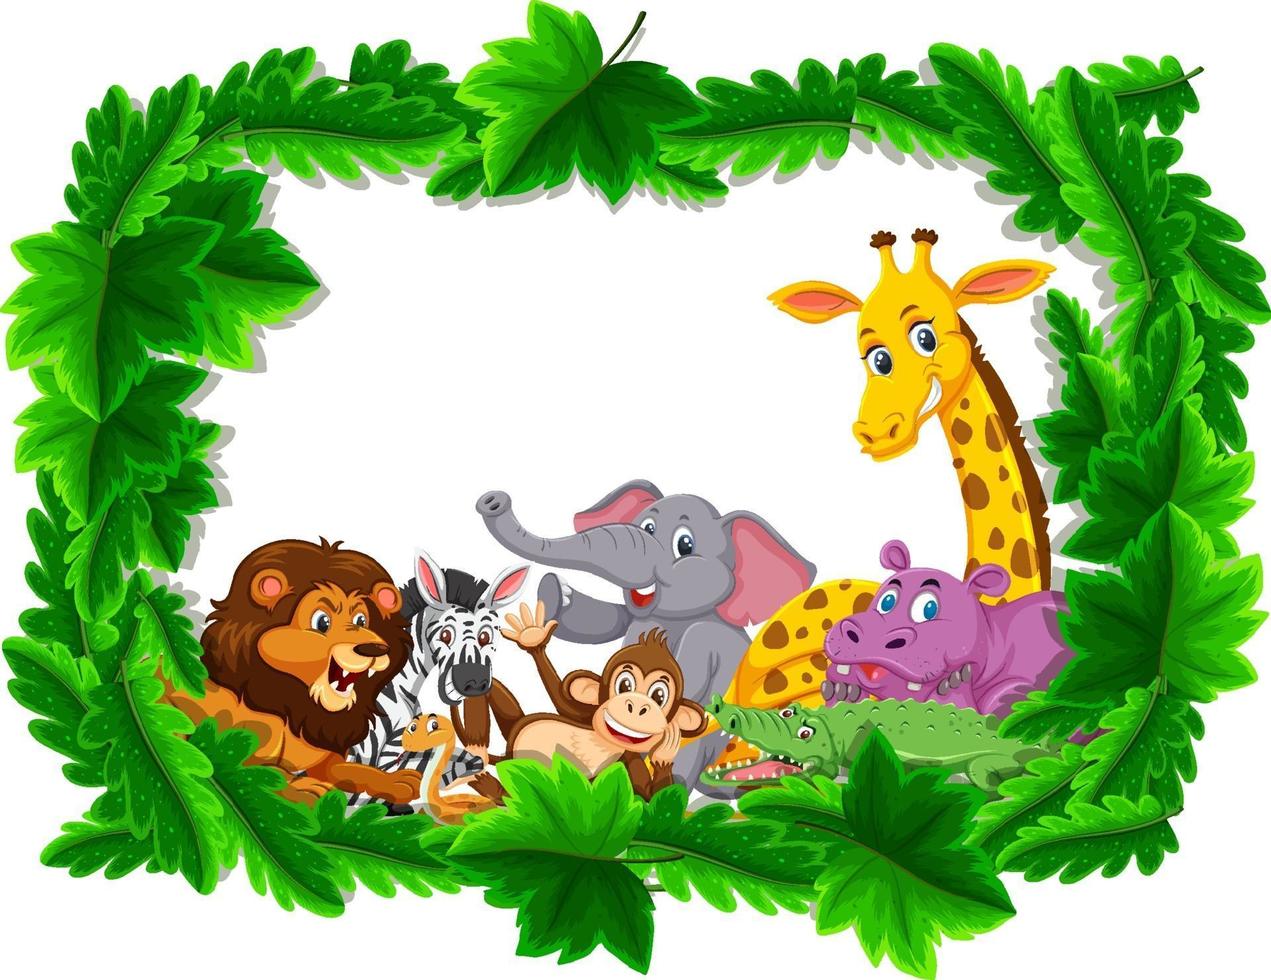 Wild animals group in forest frame vector